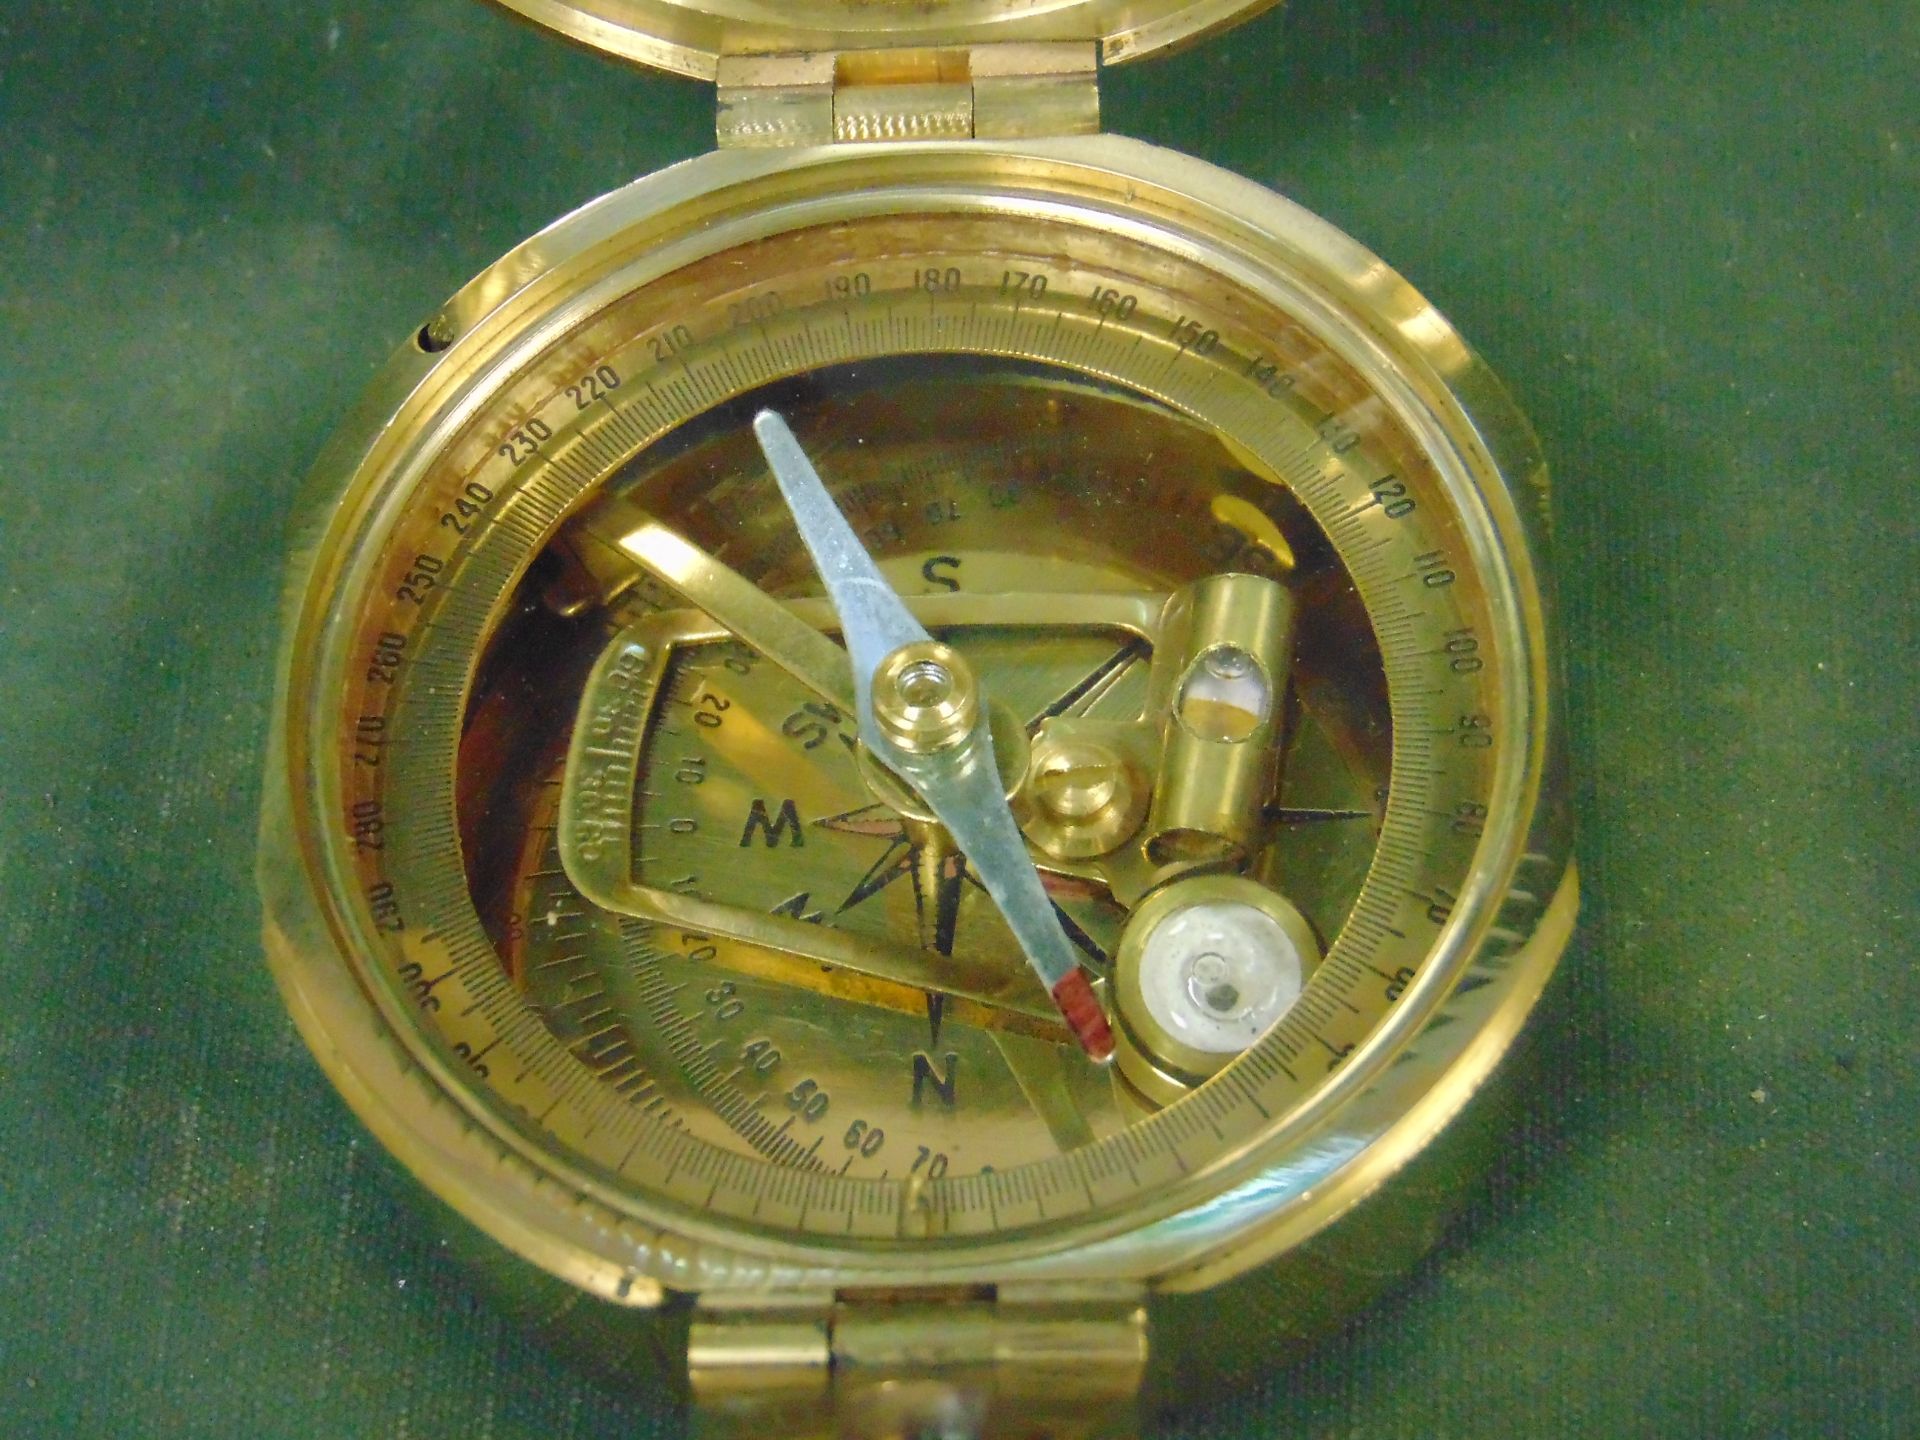 VERY NICE BRASS PRISMATIC COMPASS REPRO - Image 2 of 6